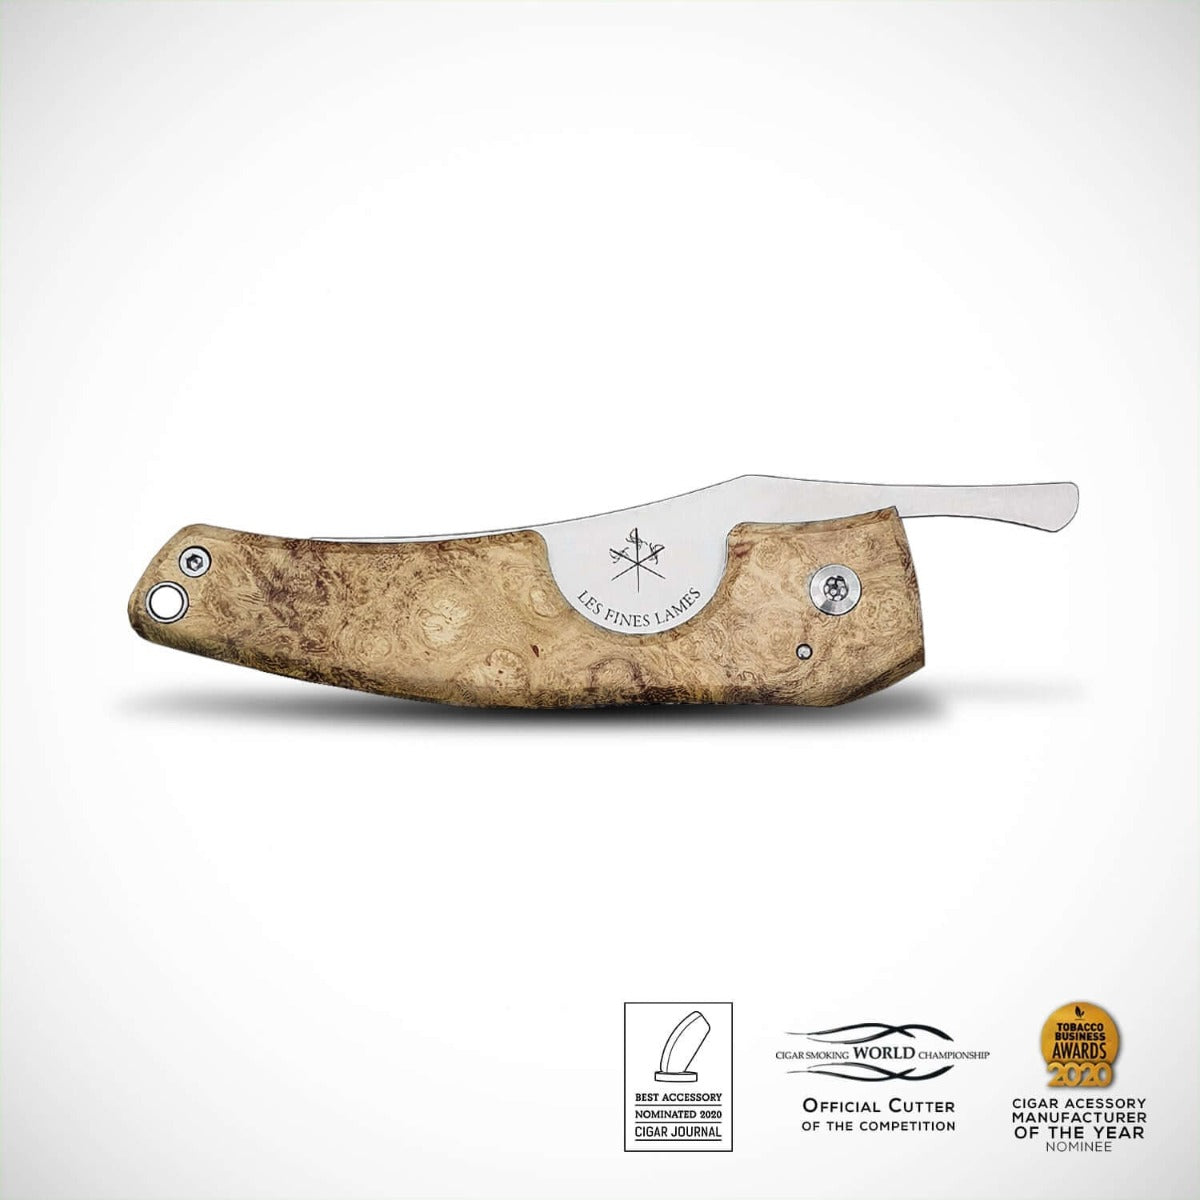 A rot-proof Kirby Allison Acacia Burl Cigar Knife with a stainless steel blade.